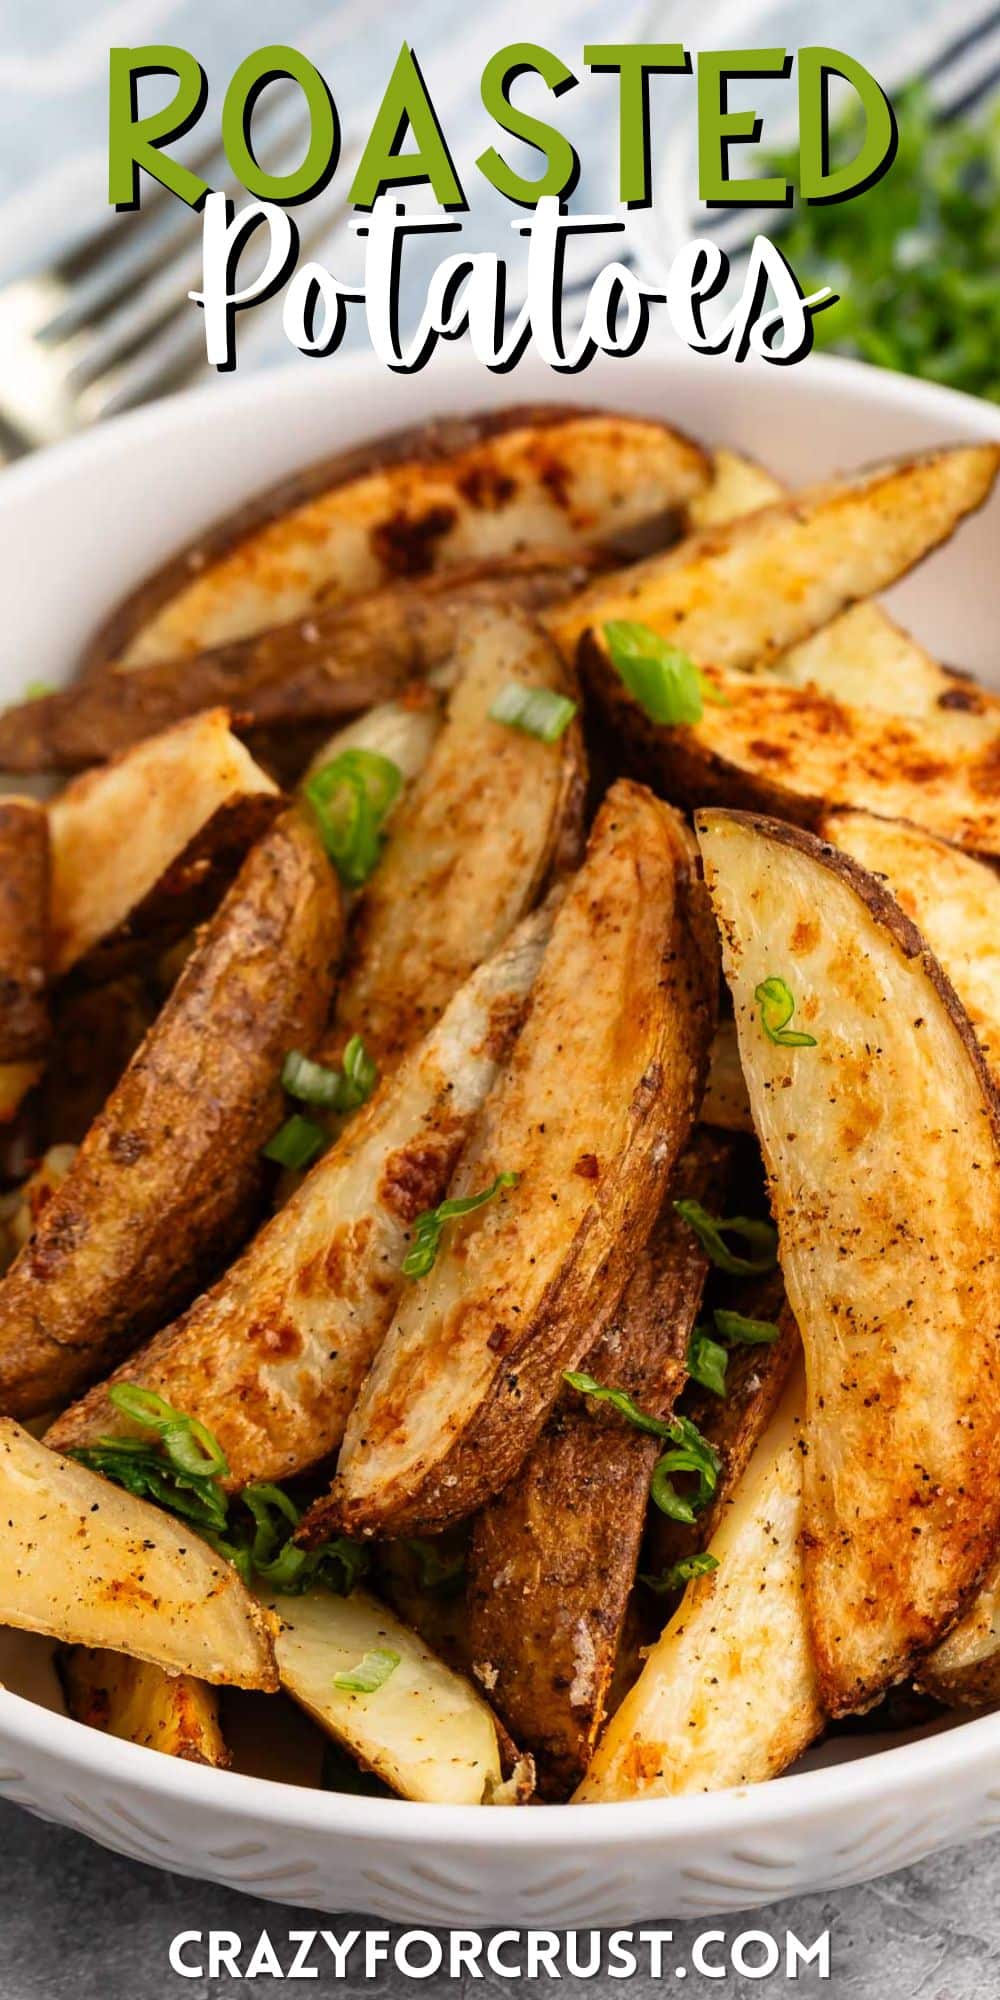 potato wedges in a white bowl with a green garnish with words on the image.